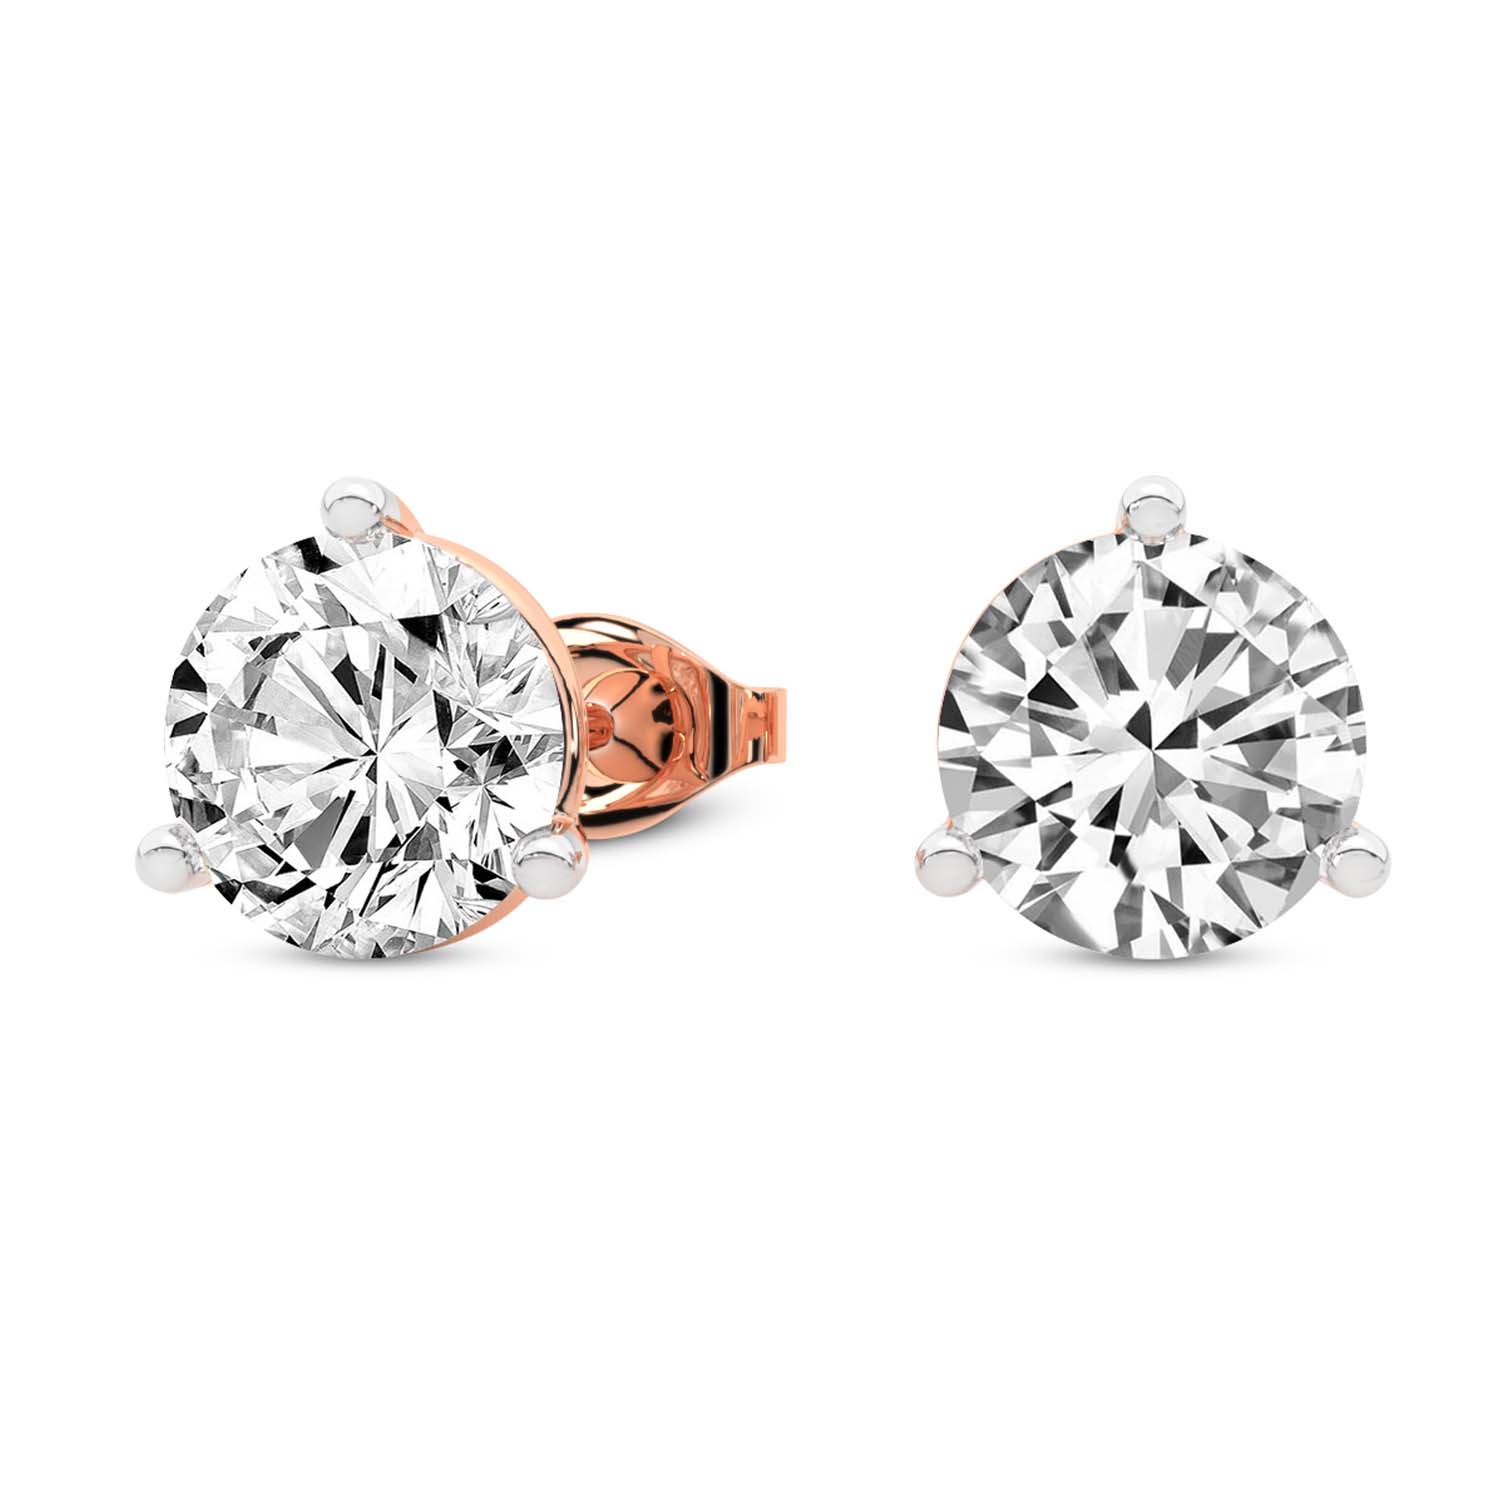 3 Prong Martini Round Lab Diamond Stud Earrings rose gold earring, small right view